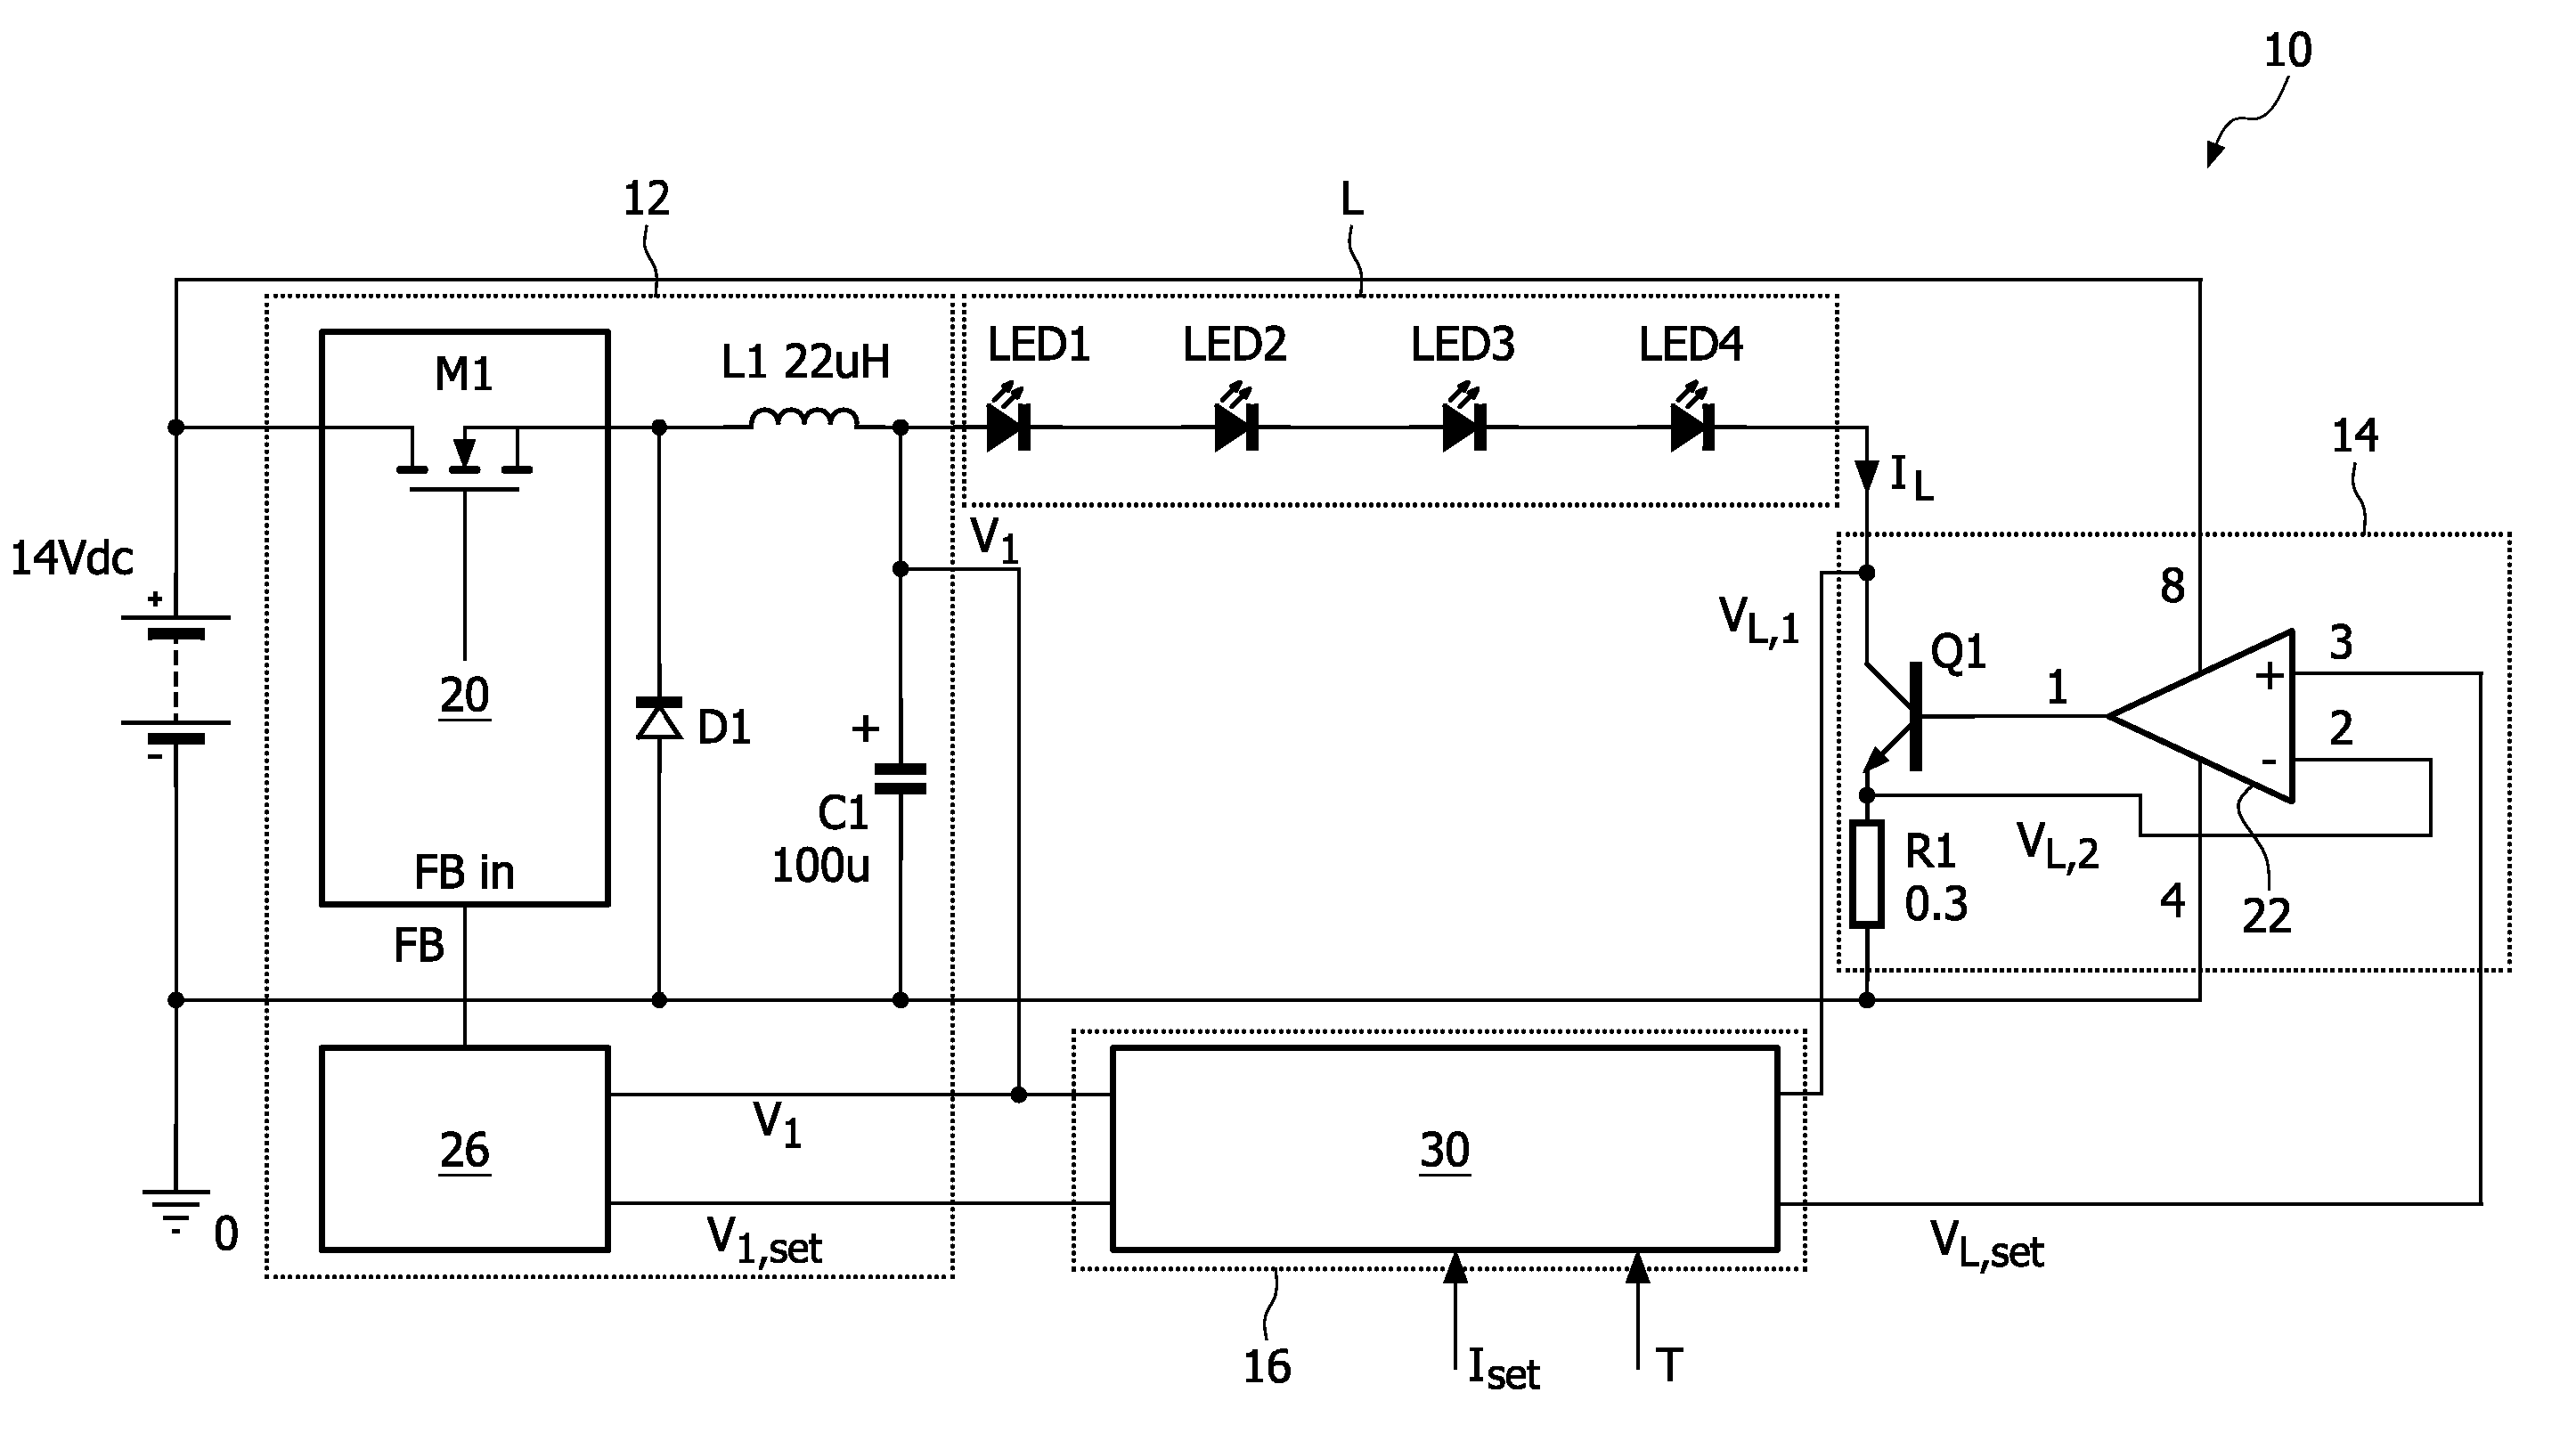 Driver circuit for loads such as LED, OLED or LASER diodes